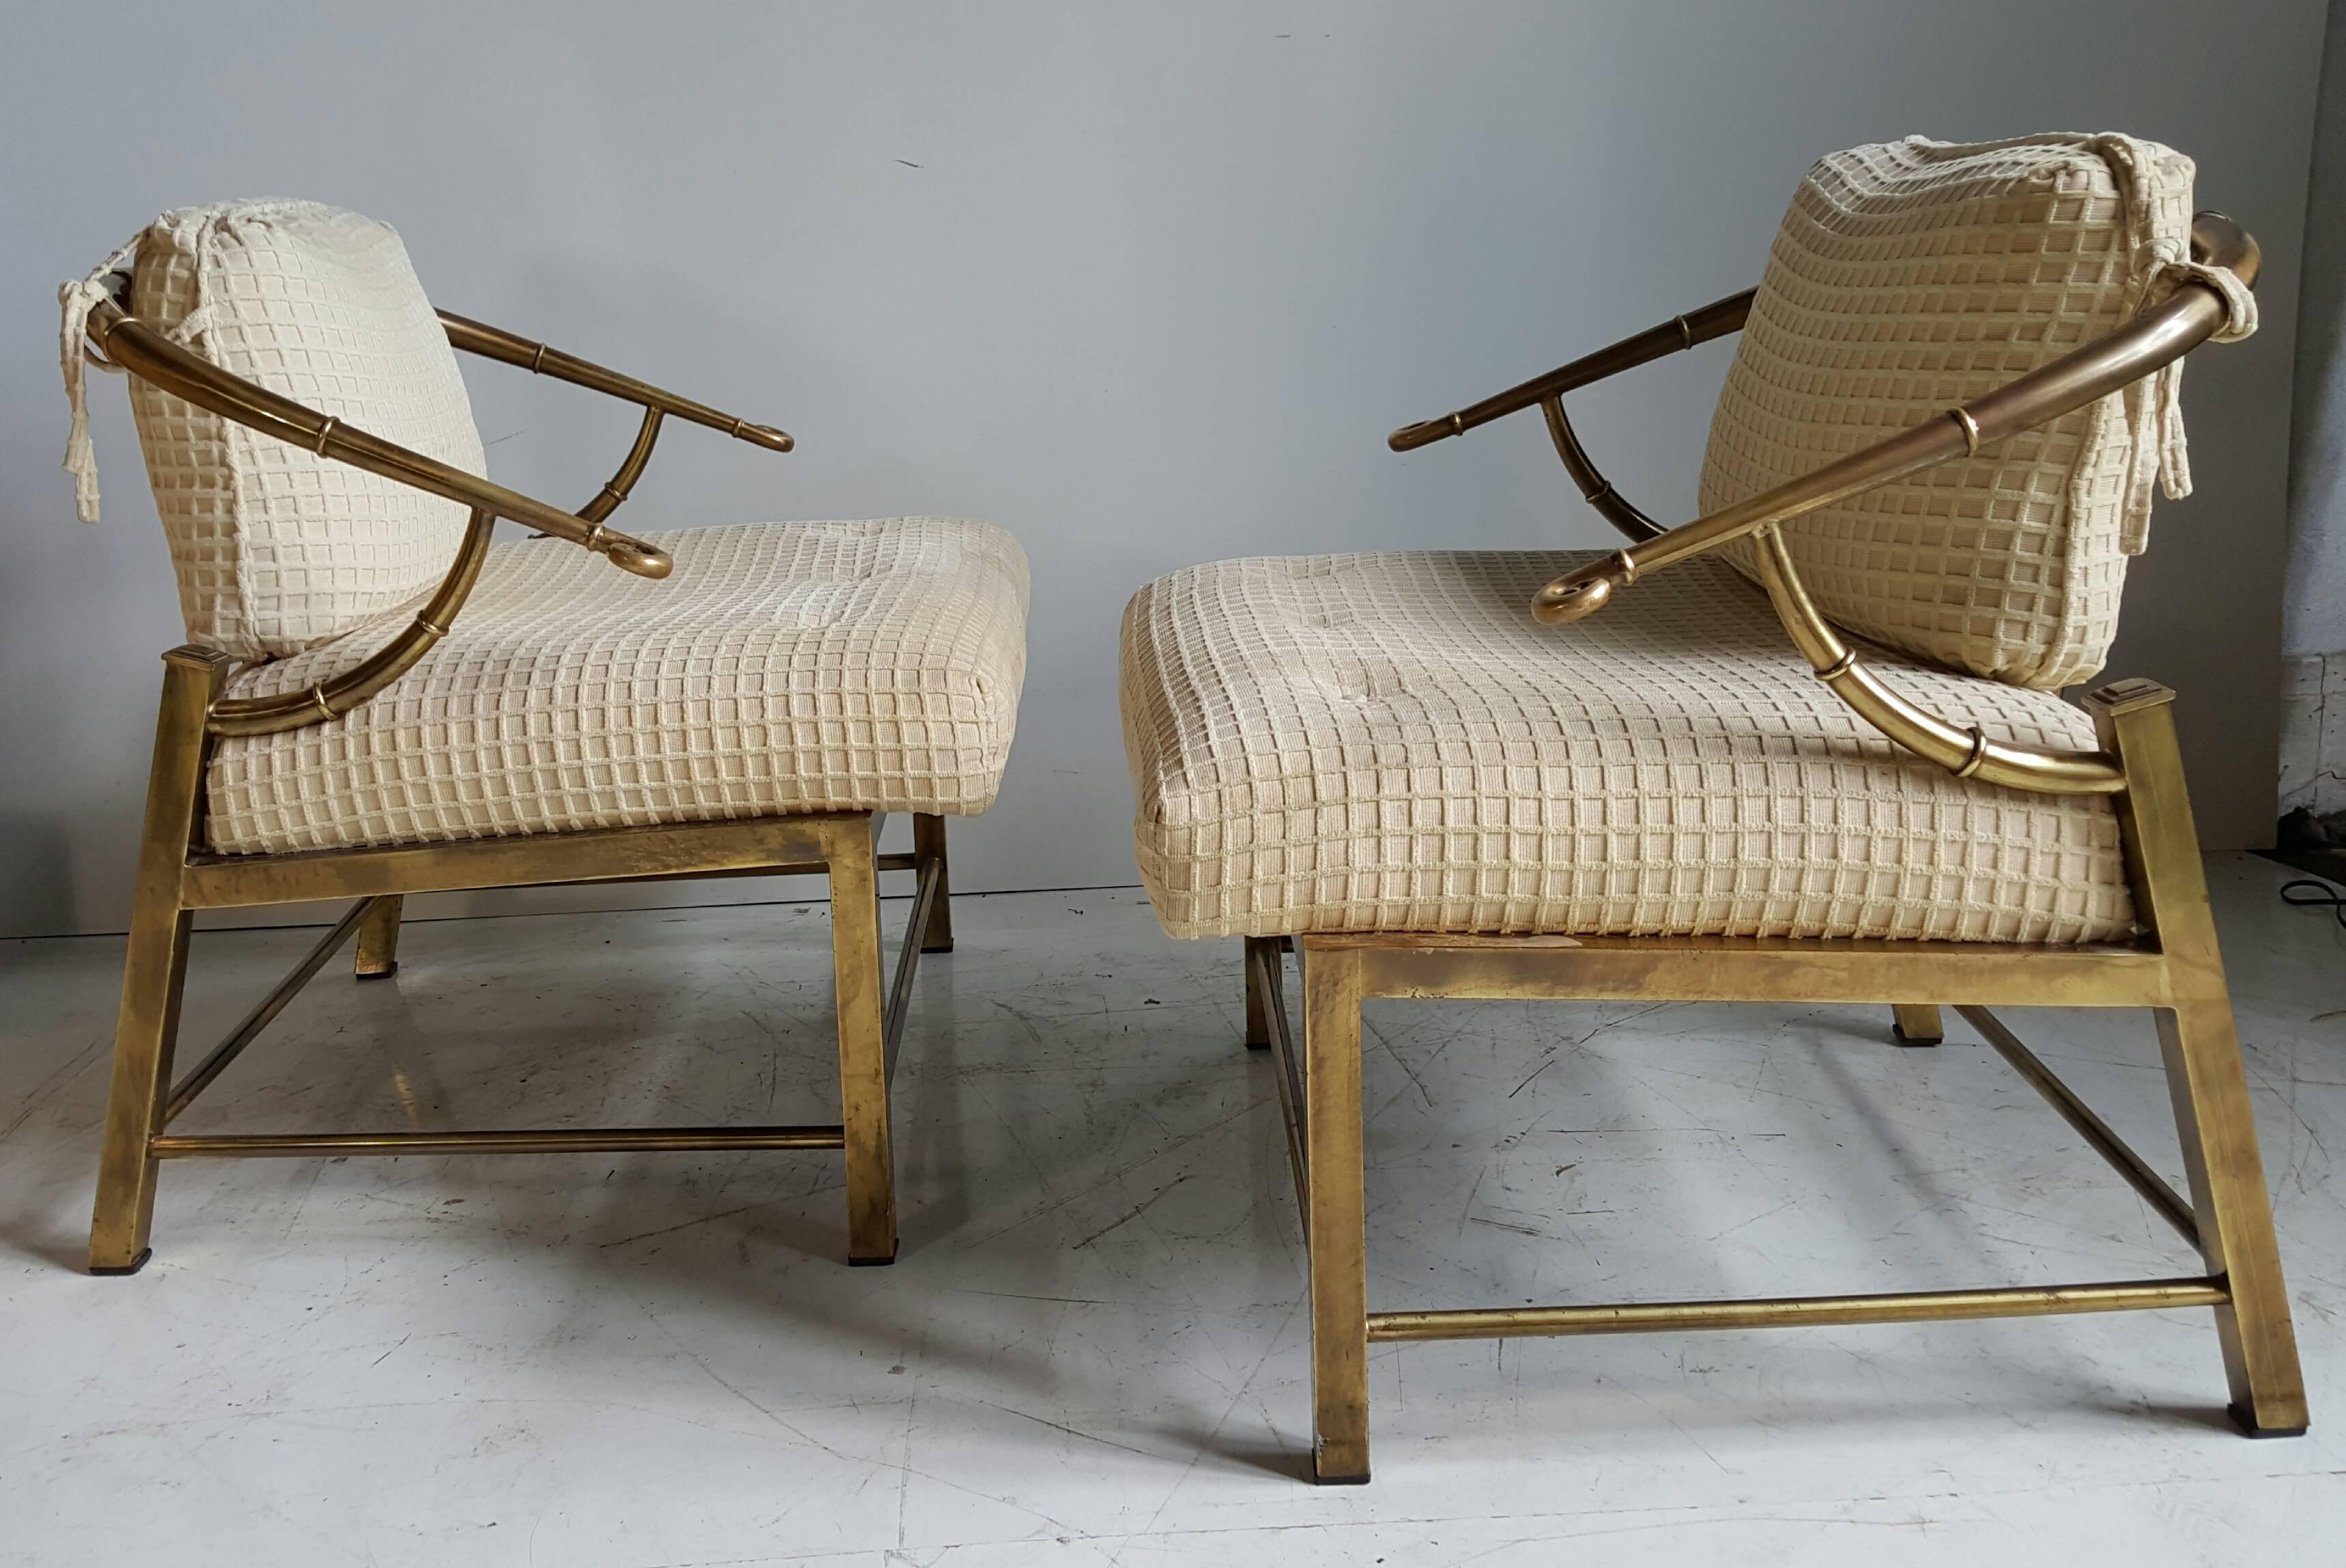 Pair of Asian inspired, faux bamboo brass lounge chairs by Mastercraft, circa 1970s. Retain original fabric, nice useable condition. Brass has a warm original patina. Generous seat proportions. 1970s chinoiserie brass horseshoe burnished brass